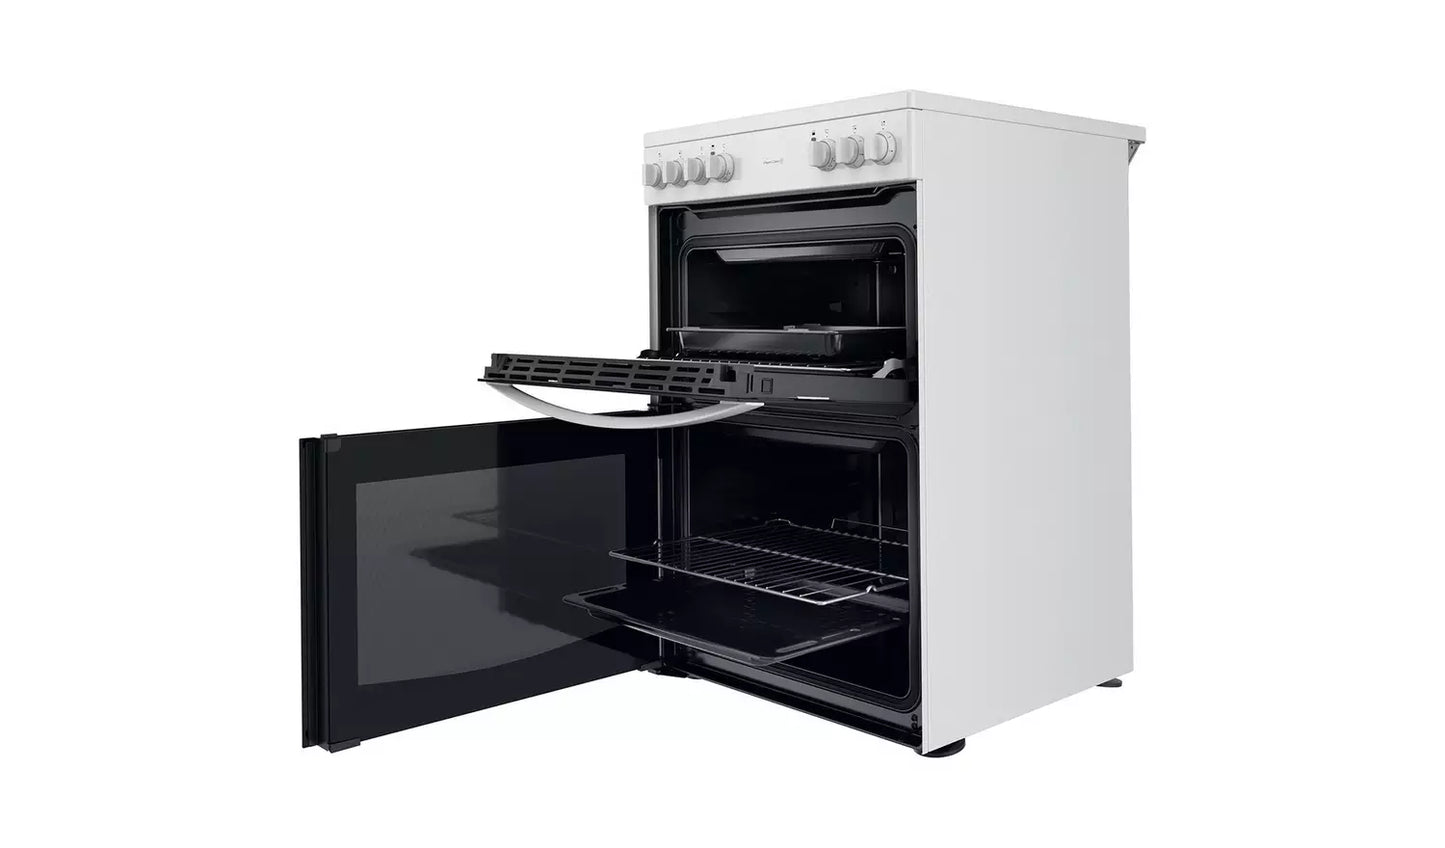 Indesit 60Cm Double Oven Electric Cooker In White - ID67V9KMWUK